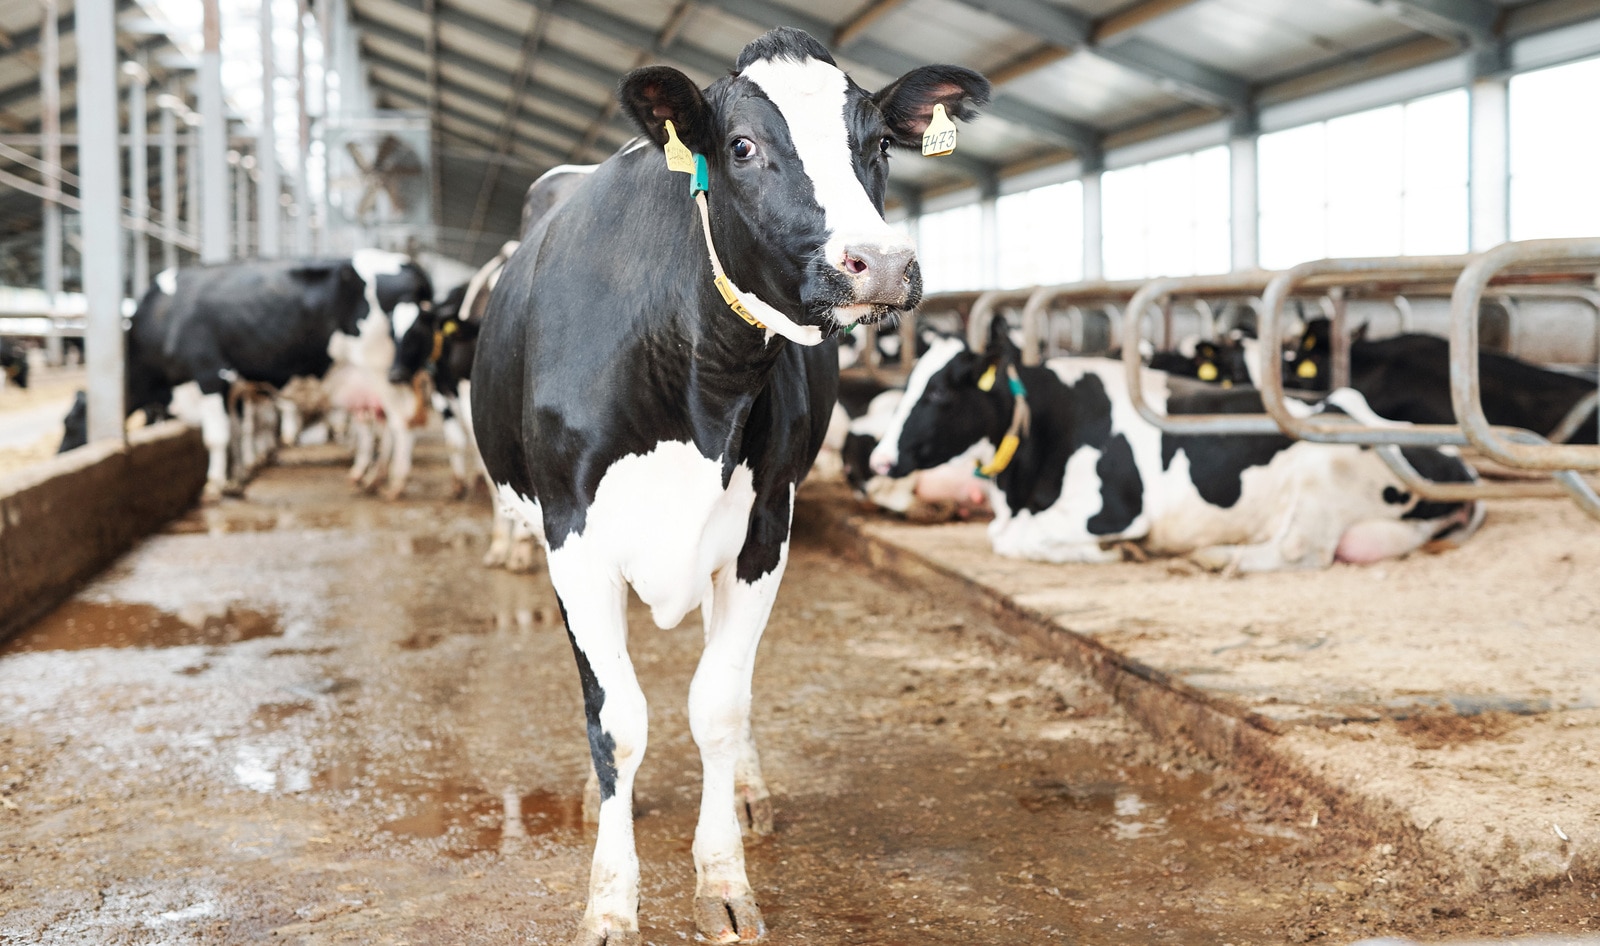 World’s Top 13 Dairy Farms Produce as Much Greenhouse Gas Emissions as All of the UK